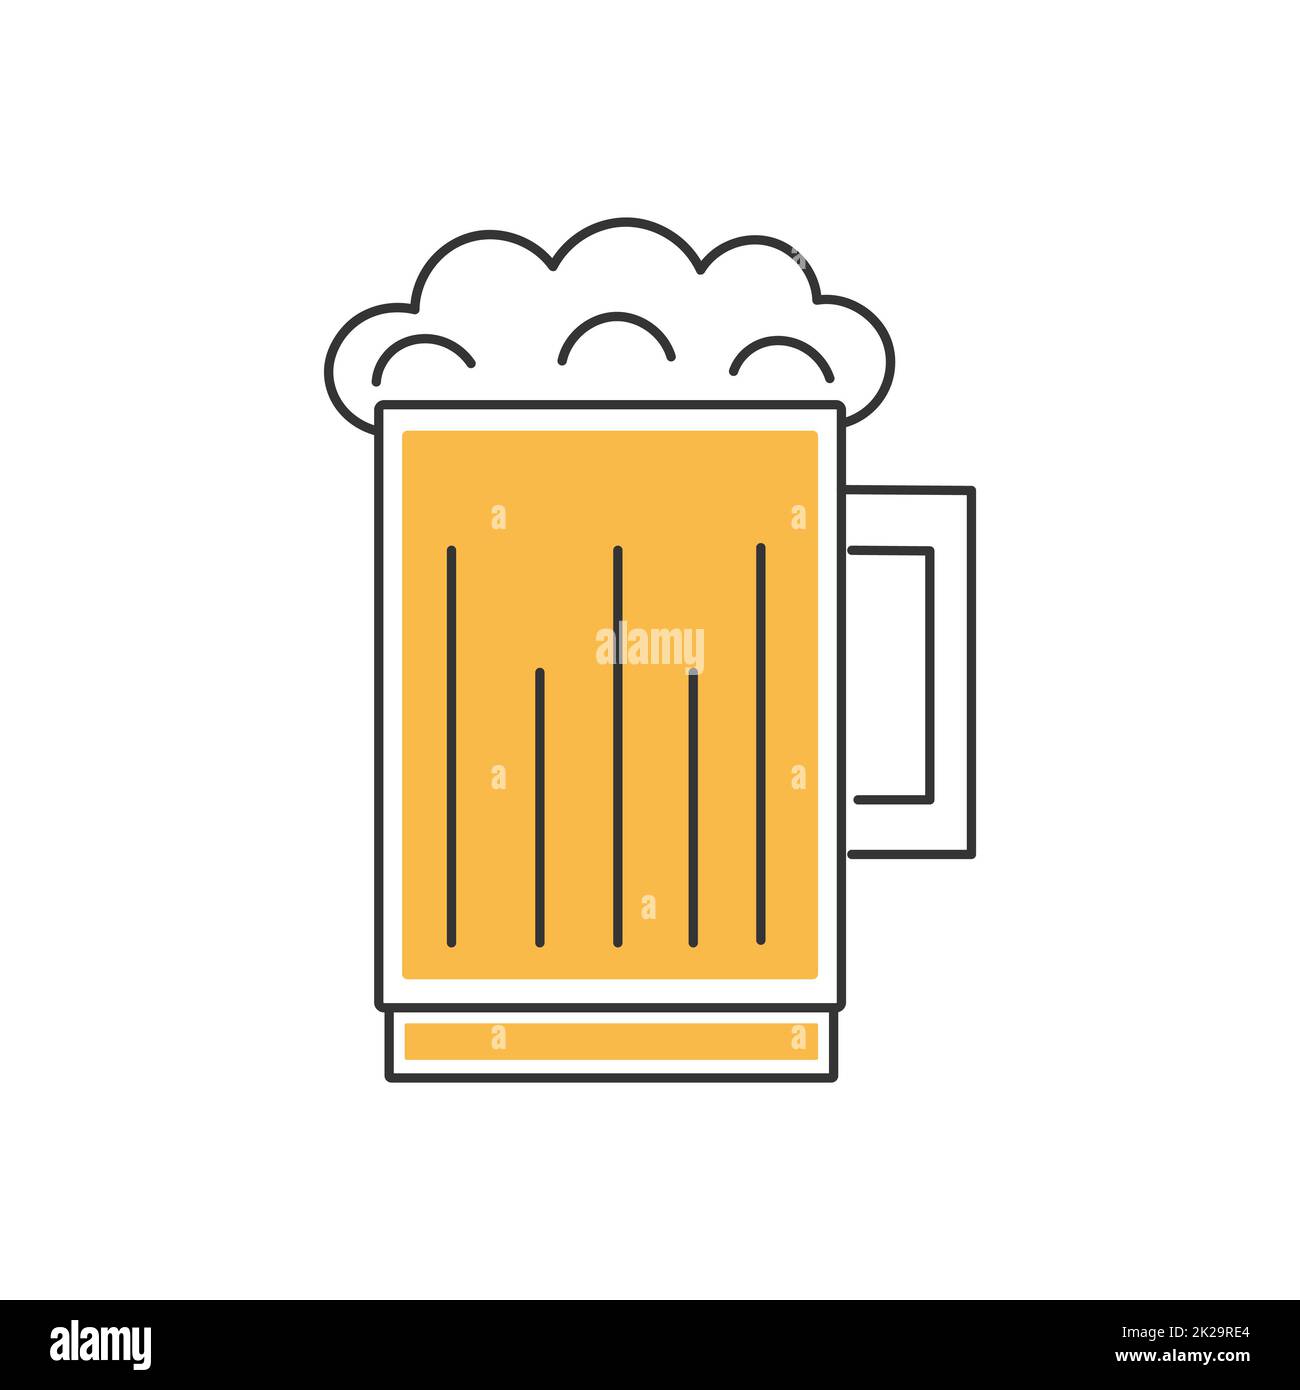 Stylish thin line icon of a beer glass on a white background - Vector Stock Photo